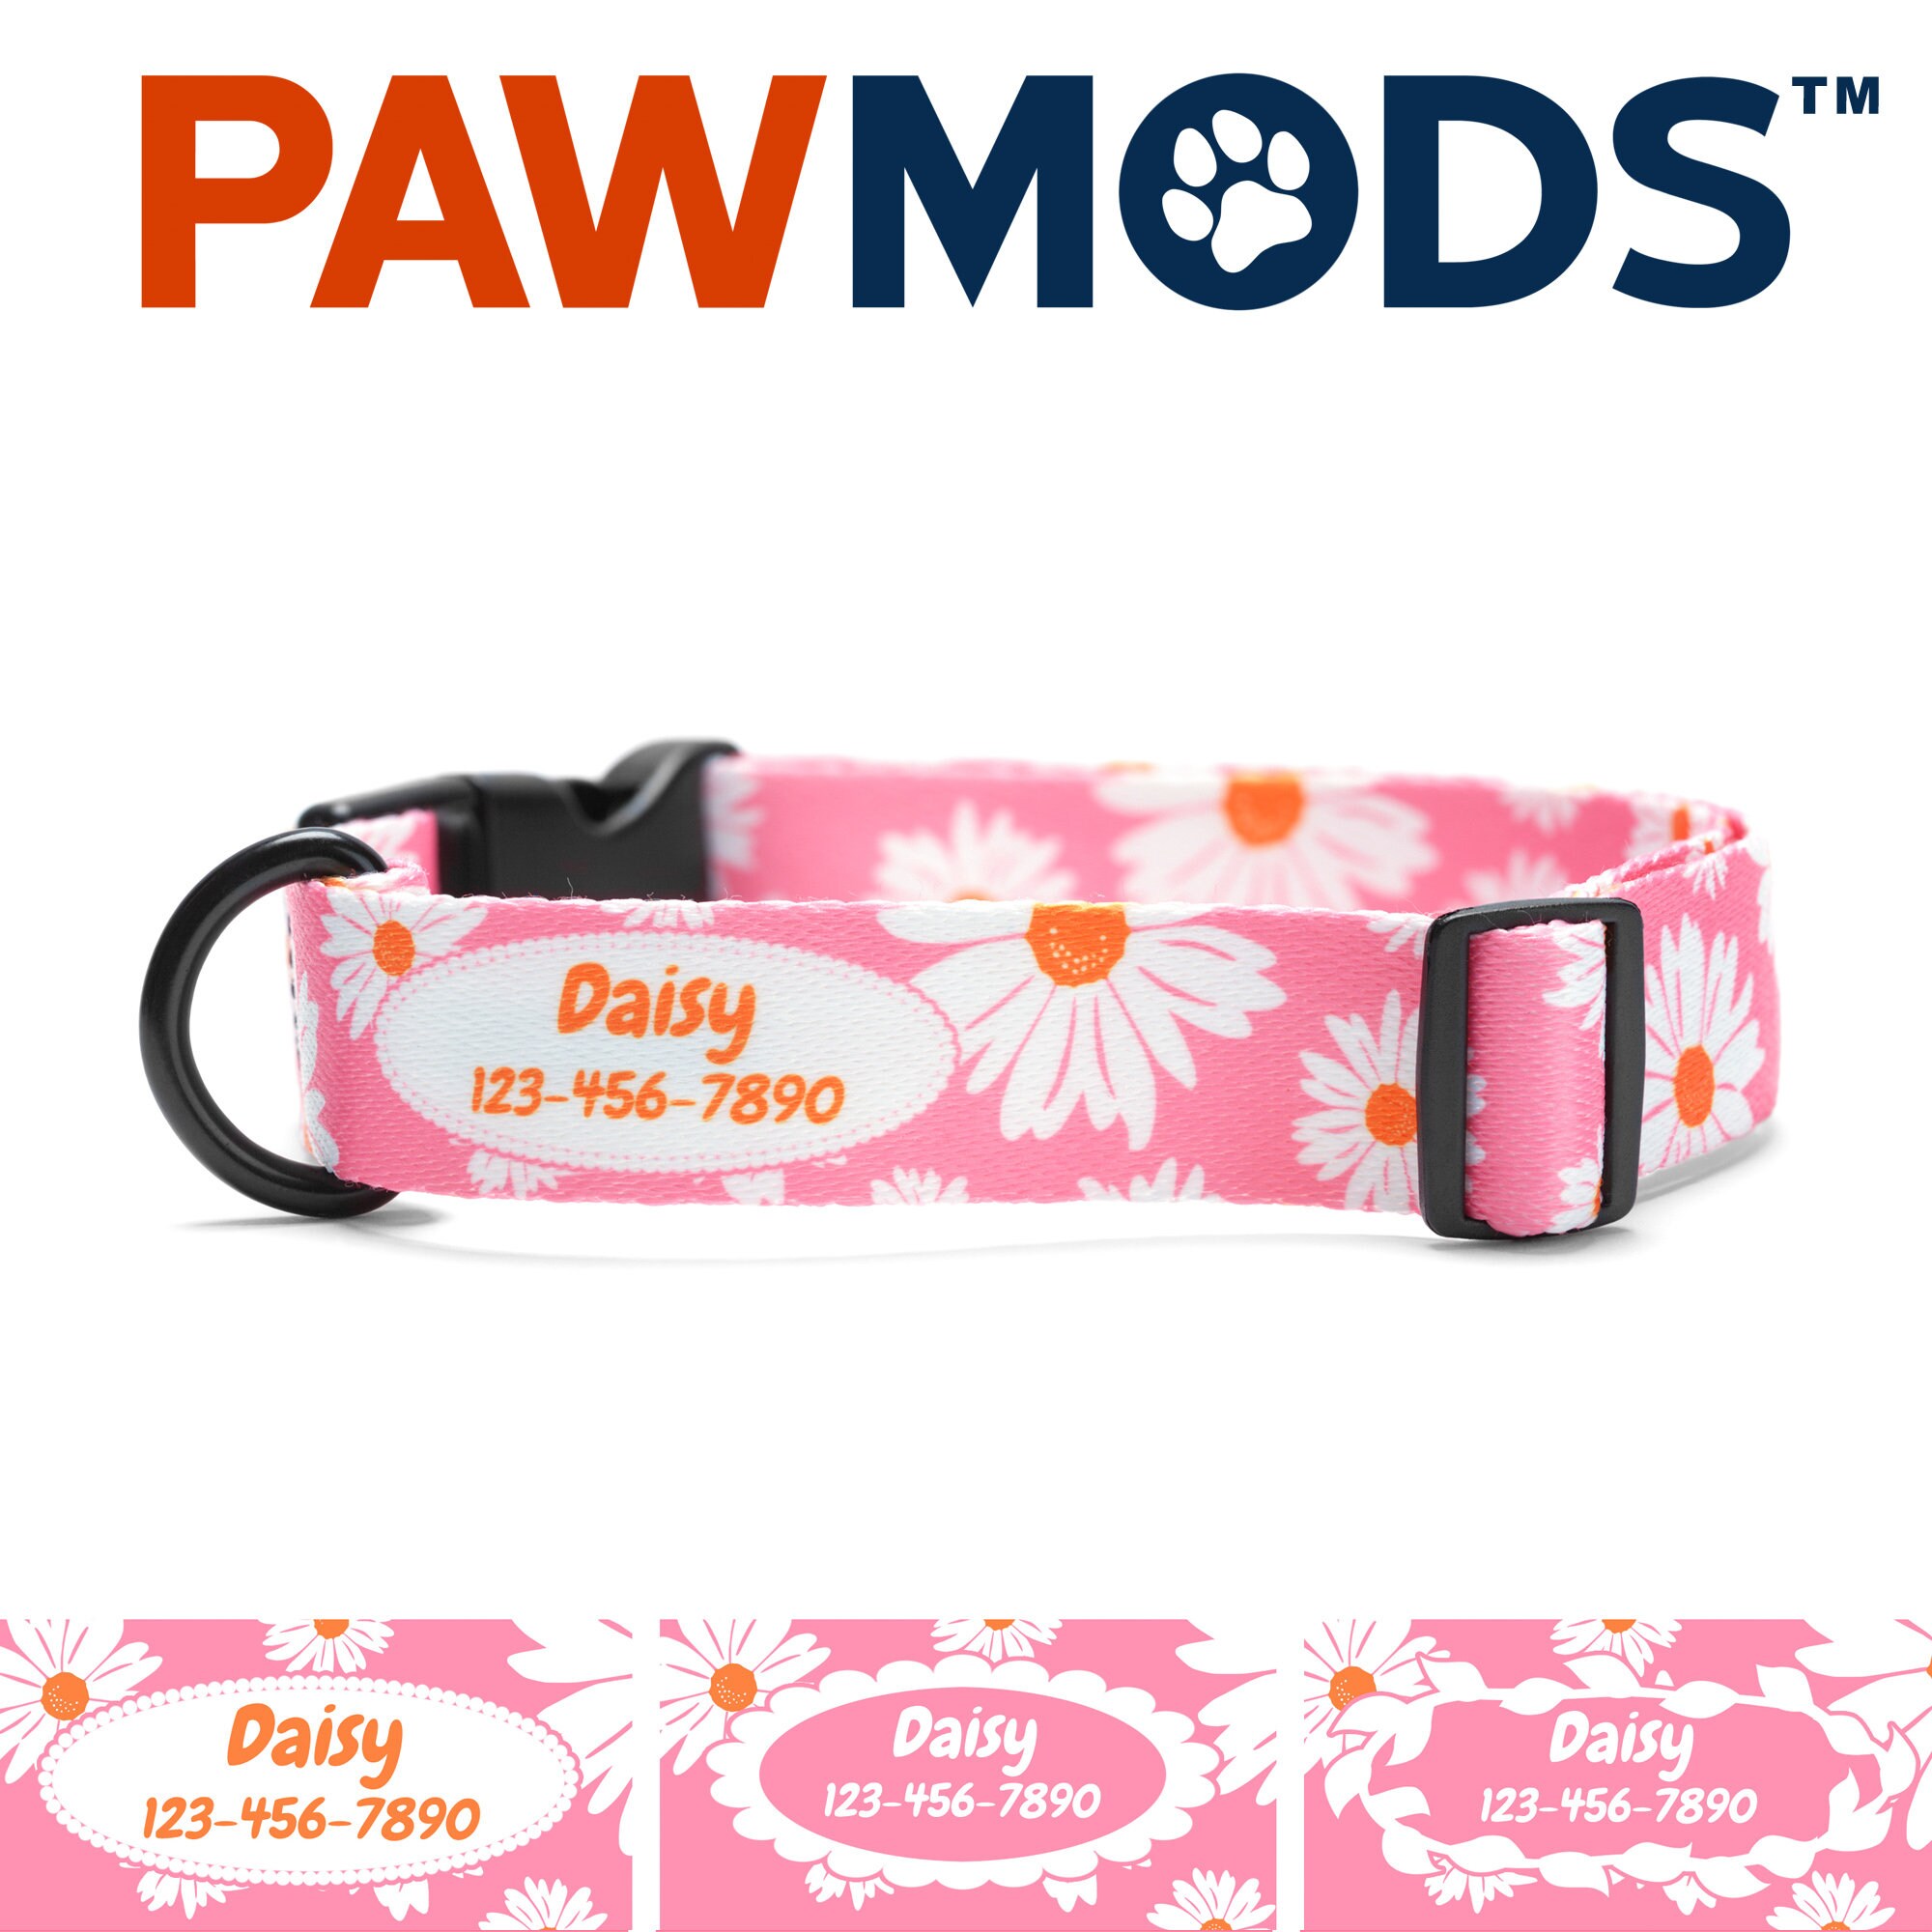 Okuna Outpost Fancy Pink Dog Collars for Small Pets (4 Pack)